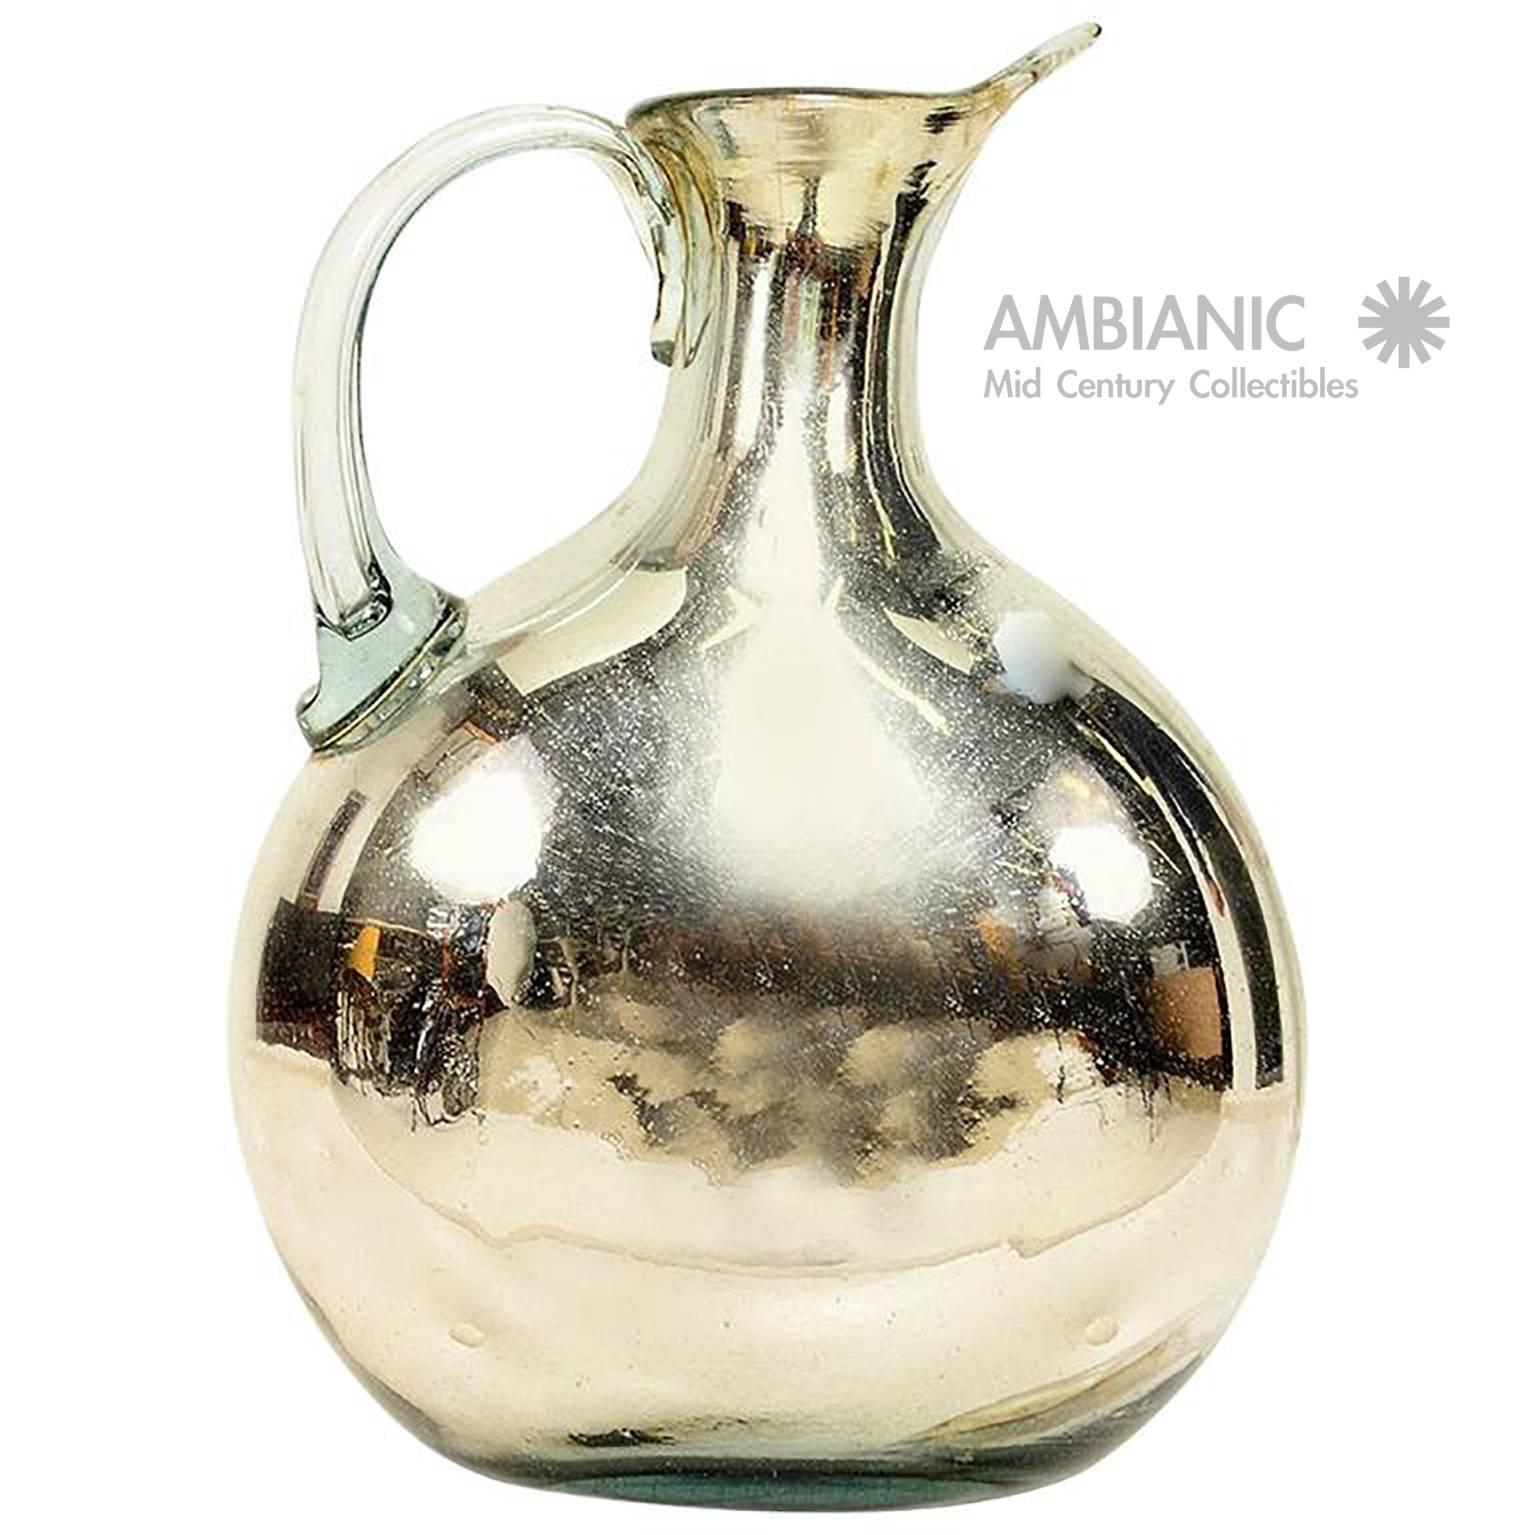 For your consideration a vintage pitcher made of mercury glass.
Measures: 16 1/2